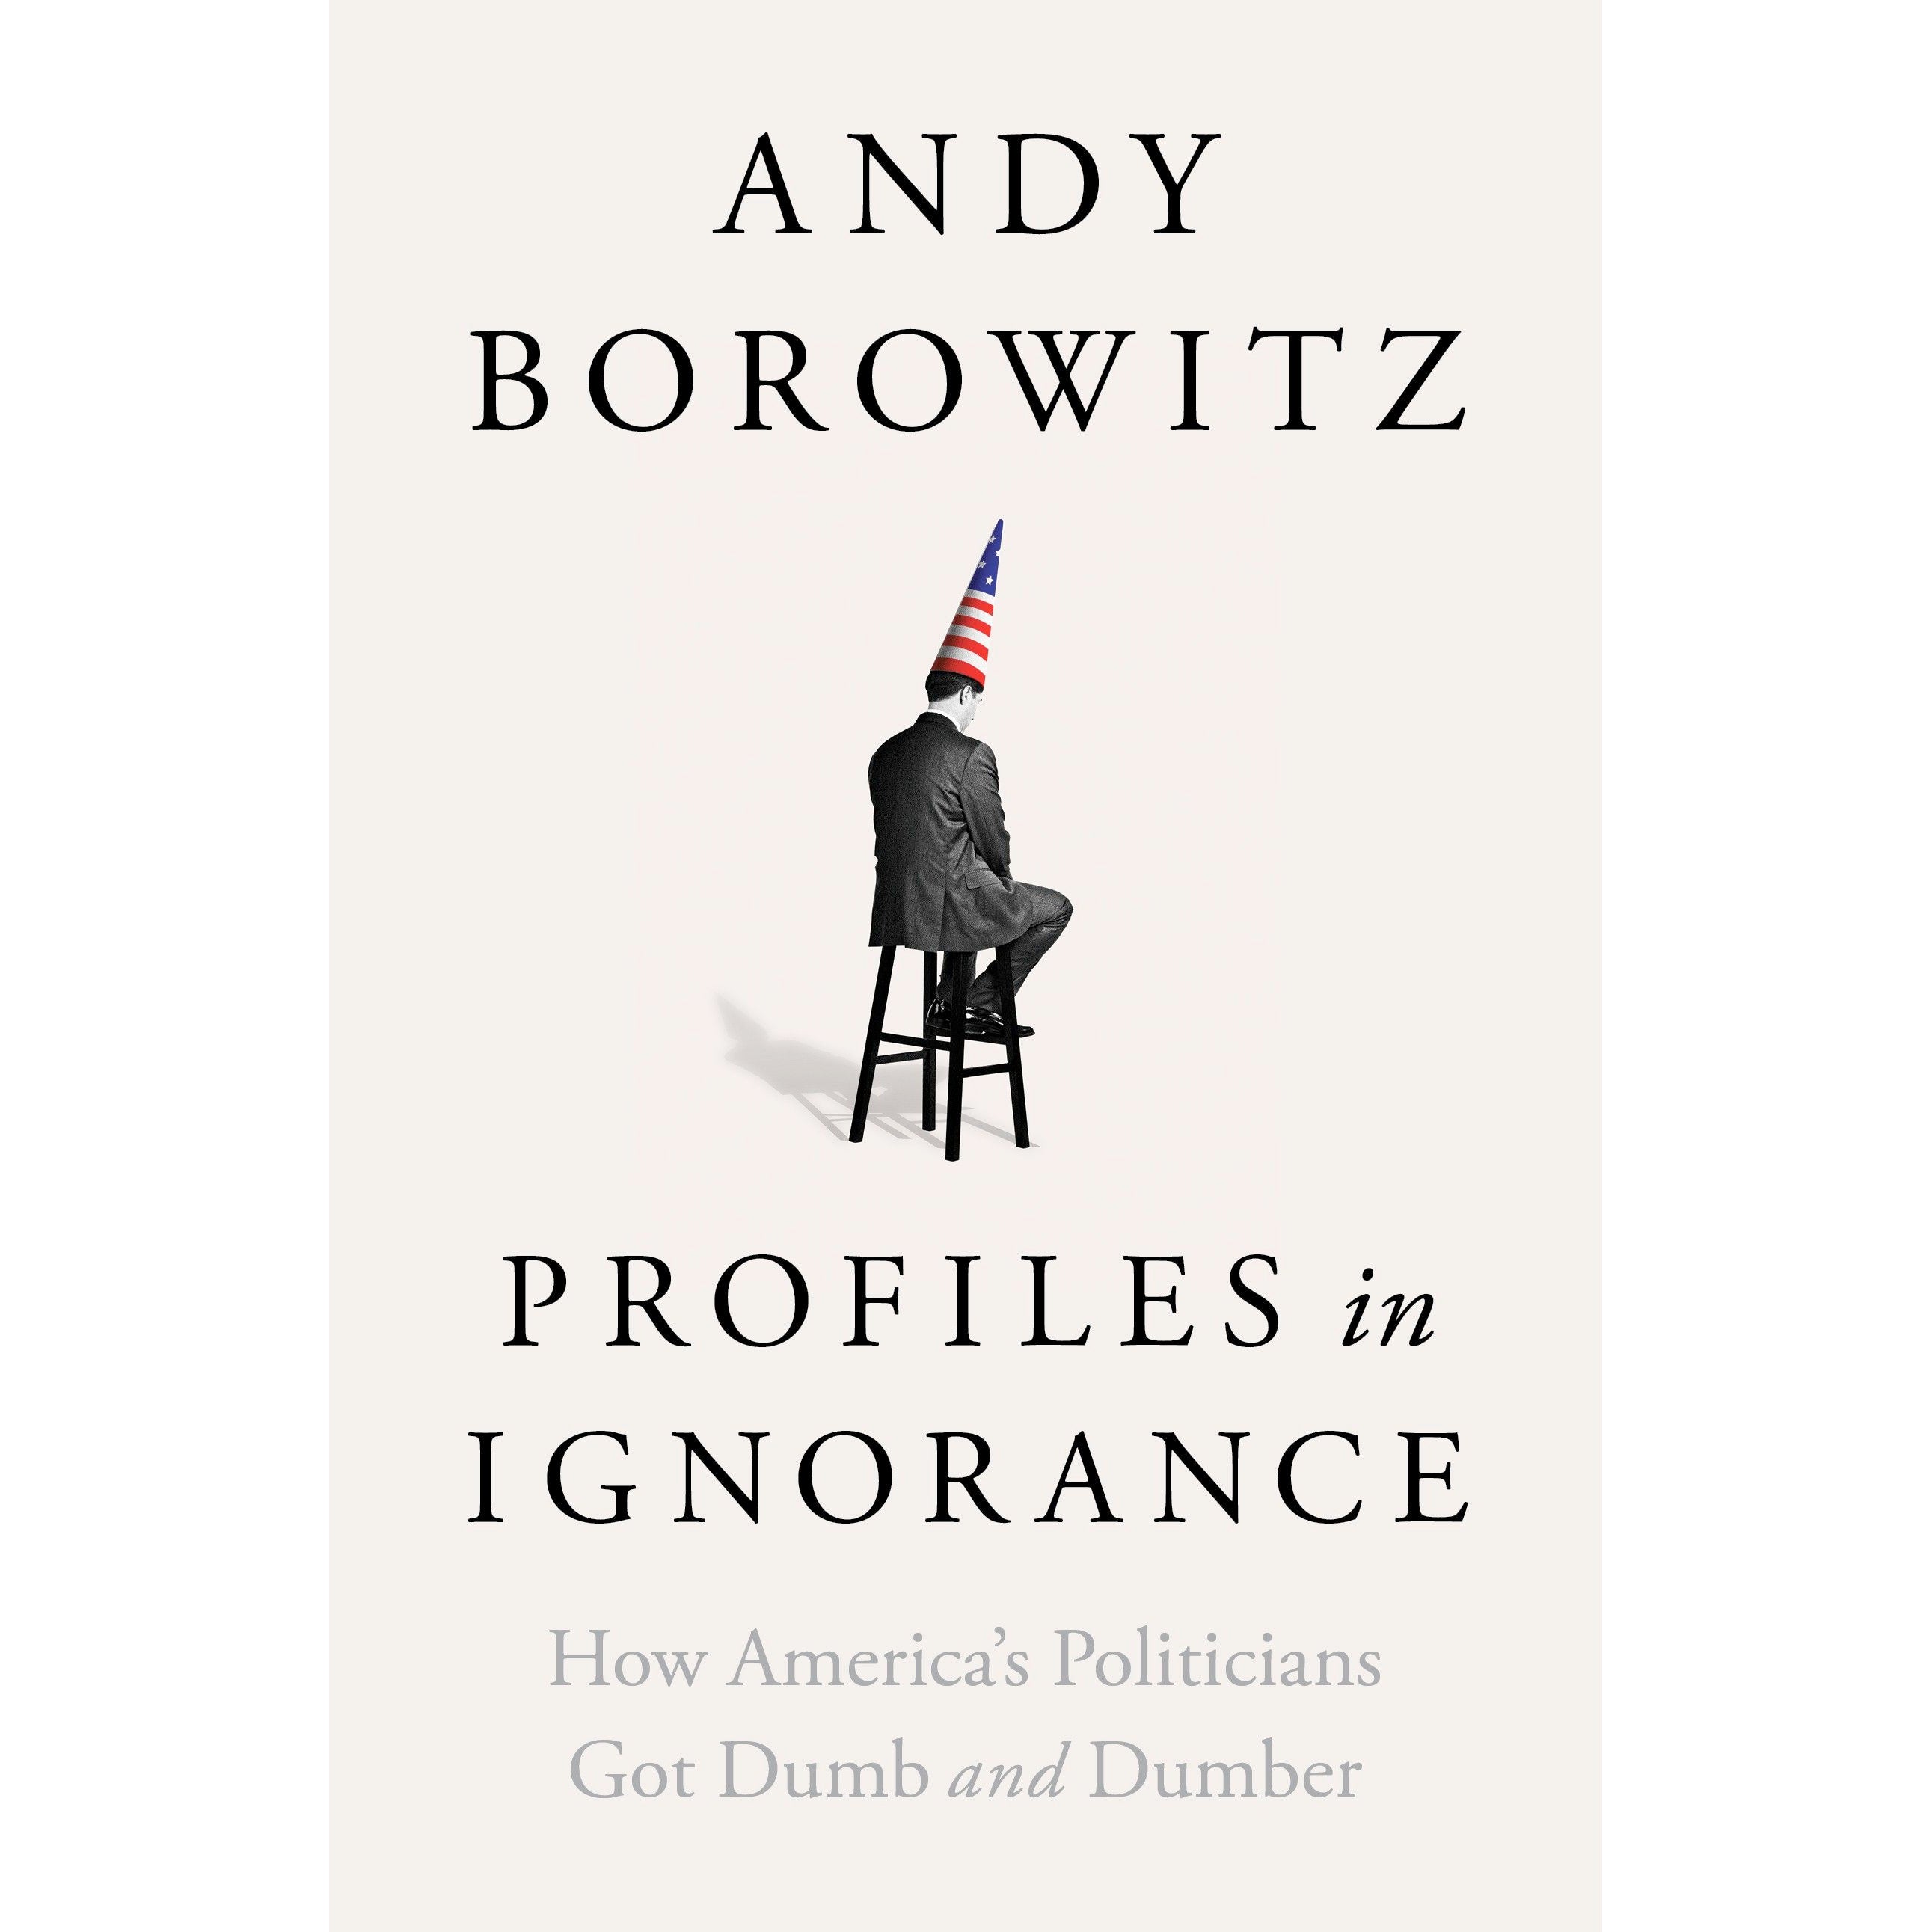 A book cover featuring a person in a dunce cap.